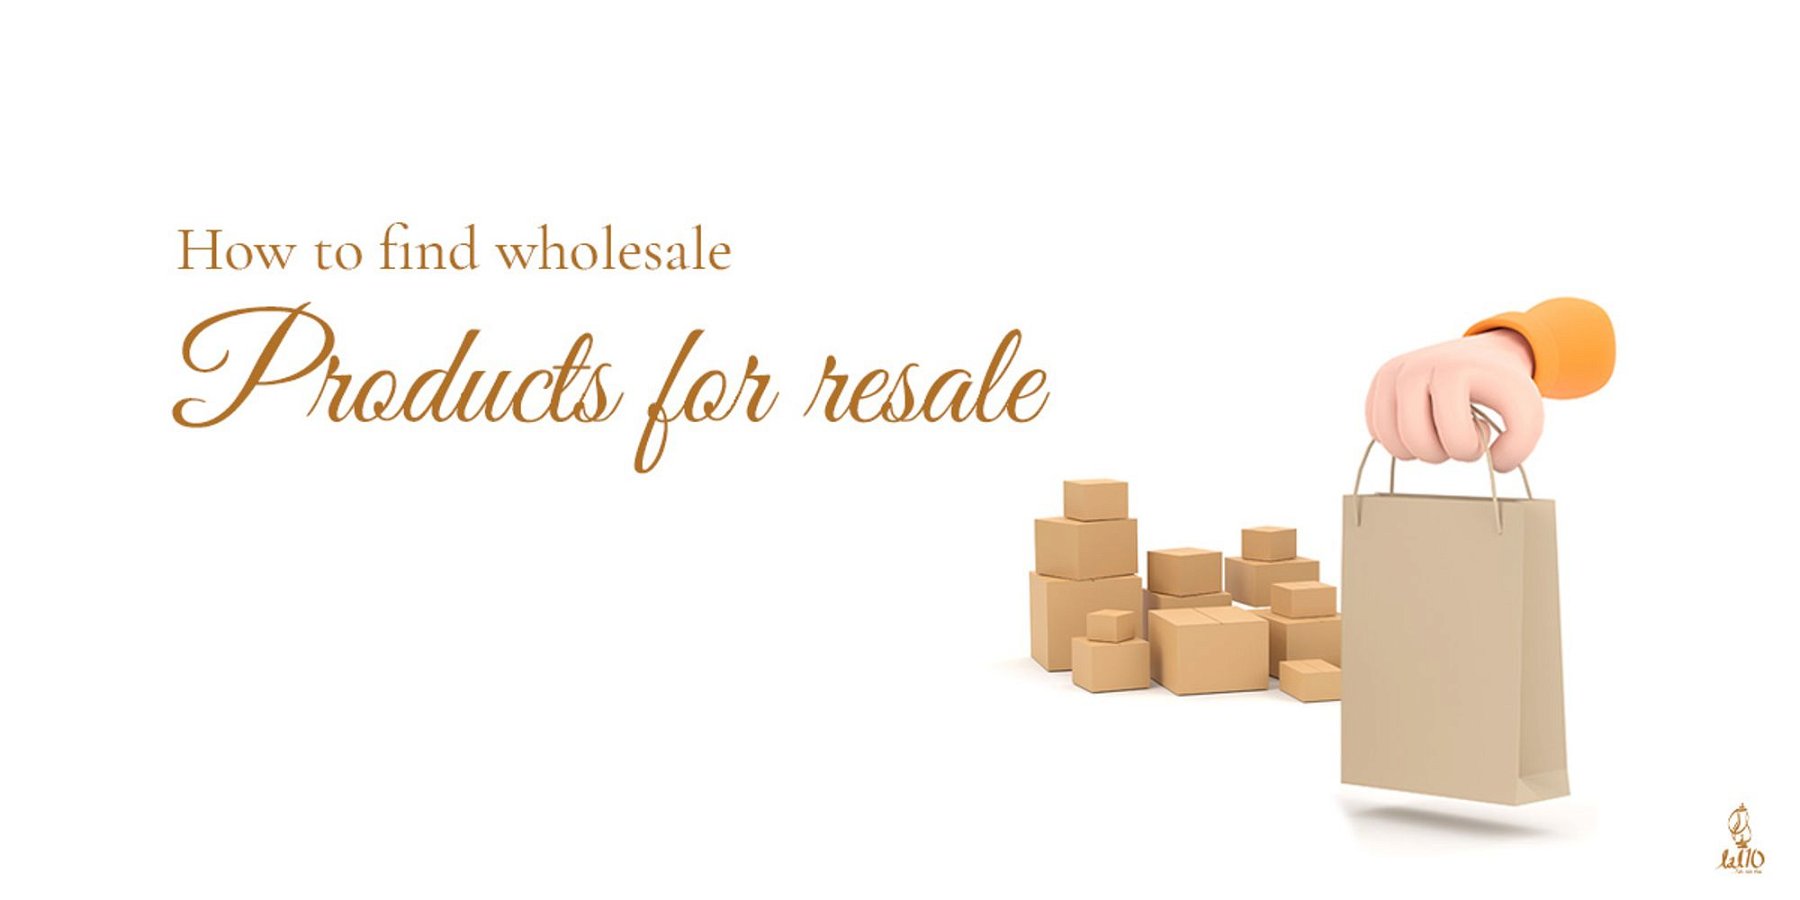 How to find wholesale

Sraducts for resale